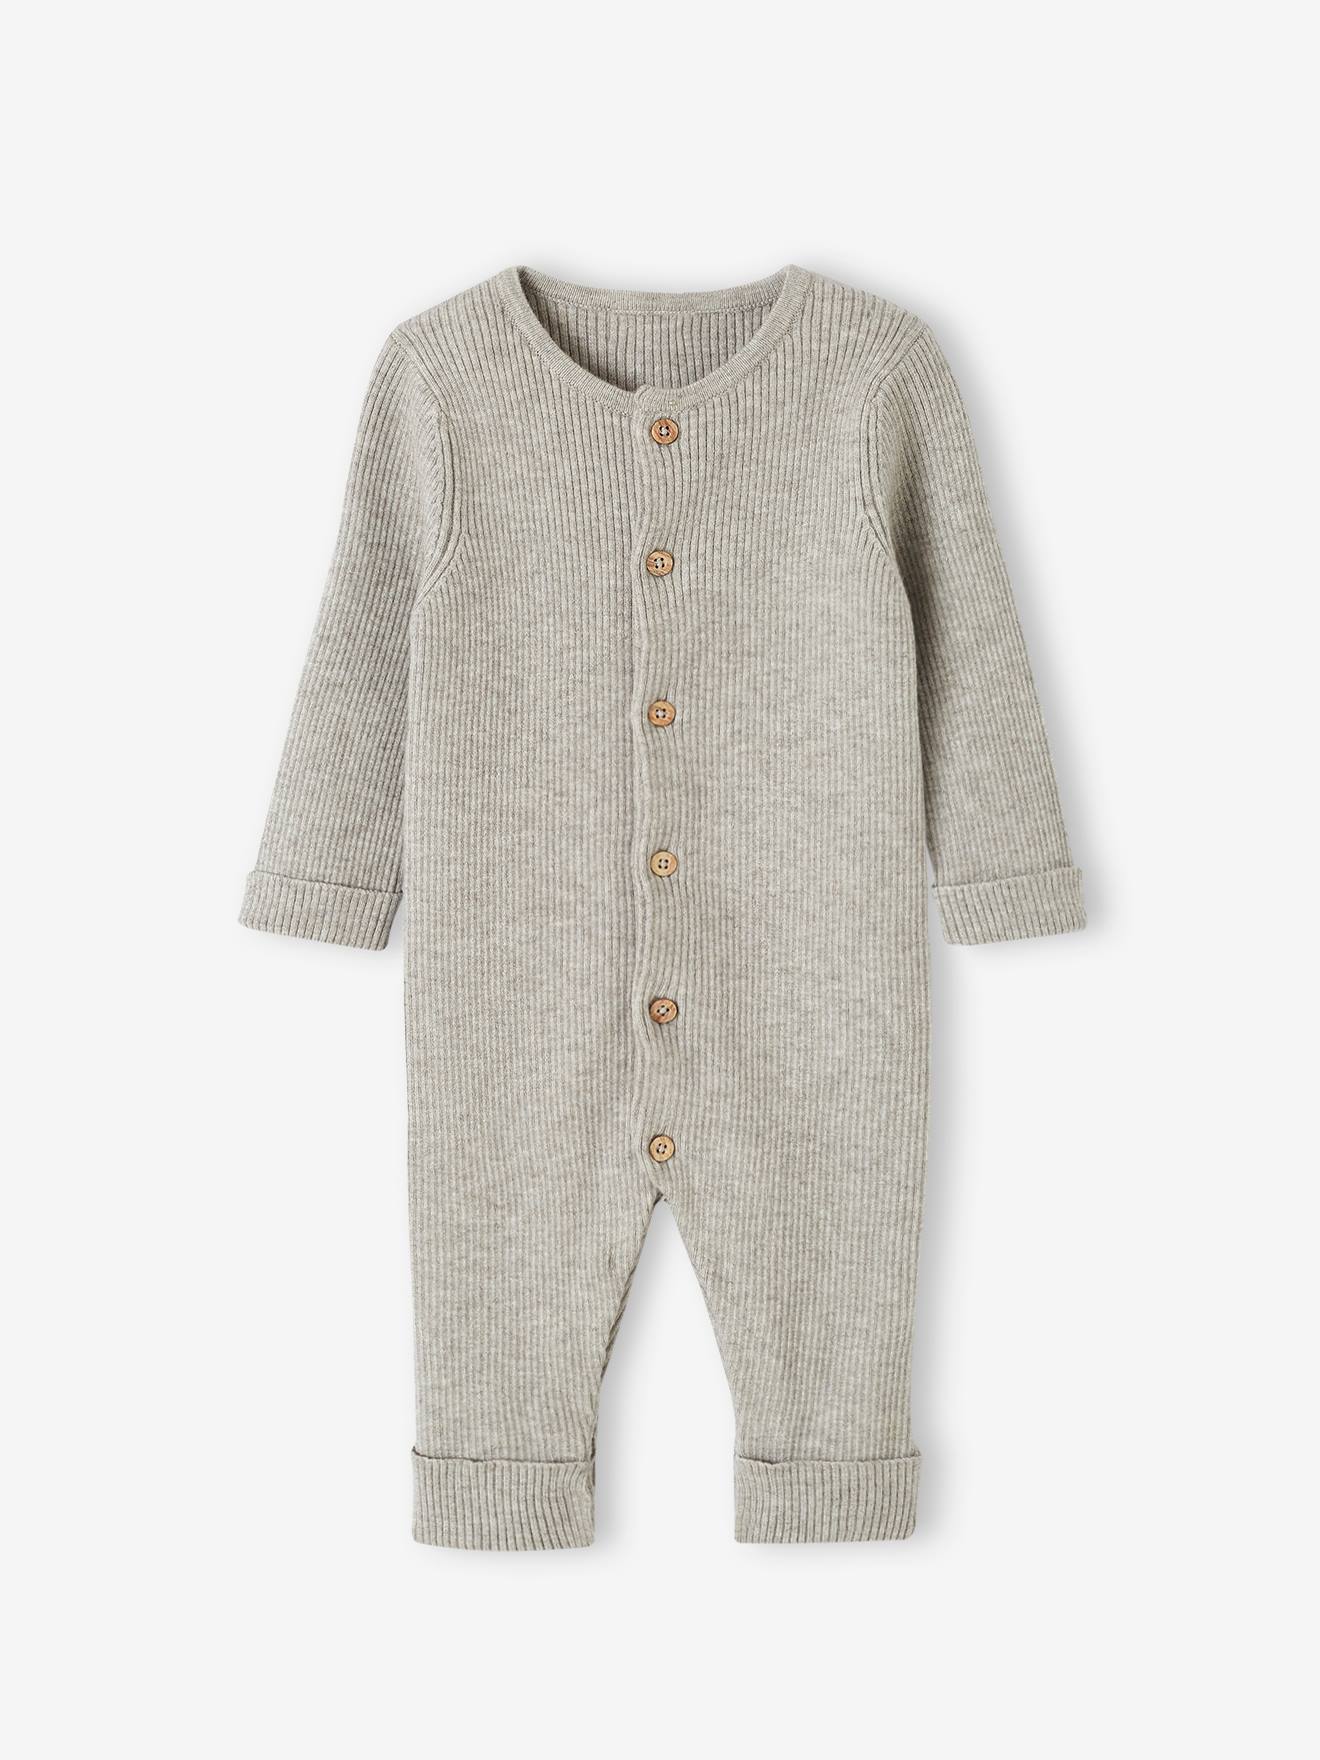 Long Sleeve Jumpsuit in Rib Knit for Babies marl grey